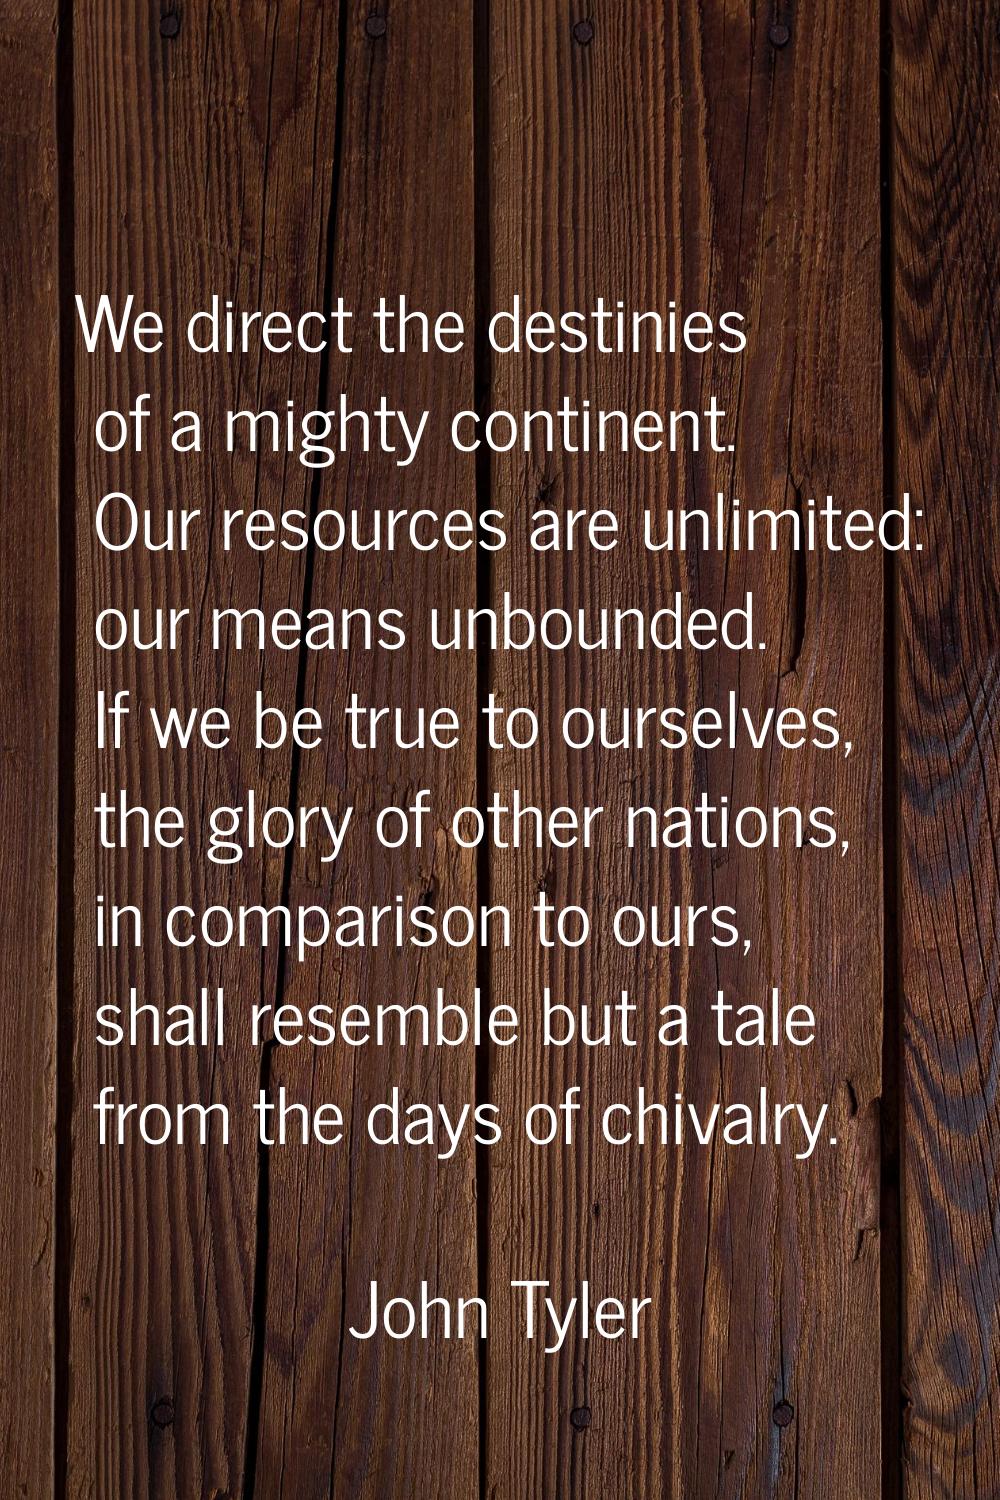 We direct the destinies of a mighty continent. Our resources are unlimited: our means unbounded. If